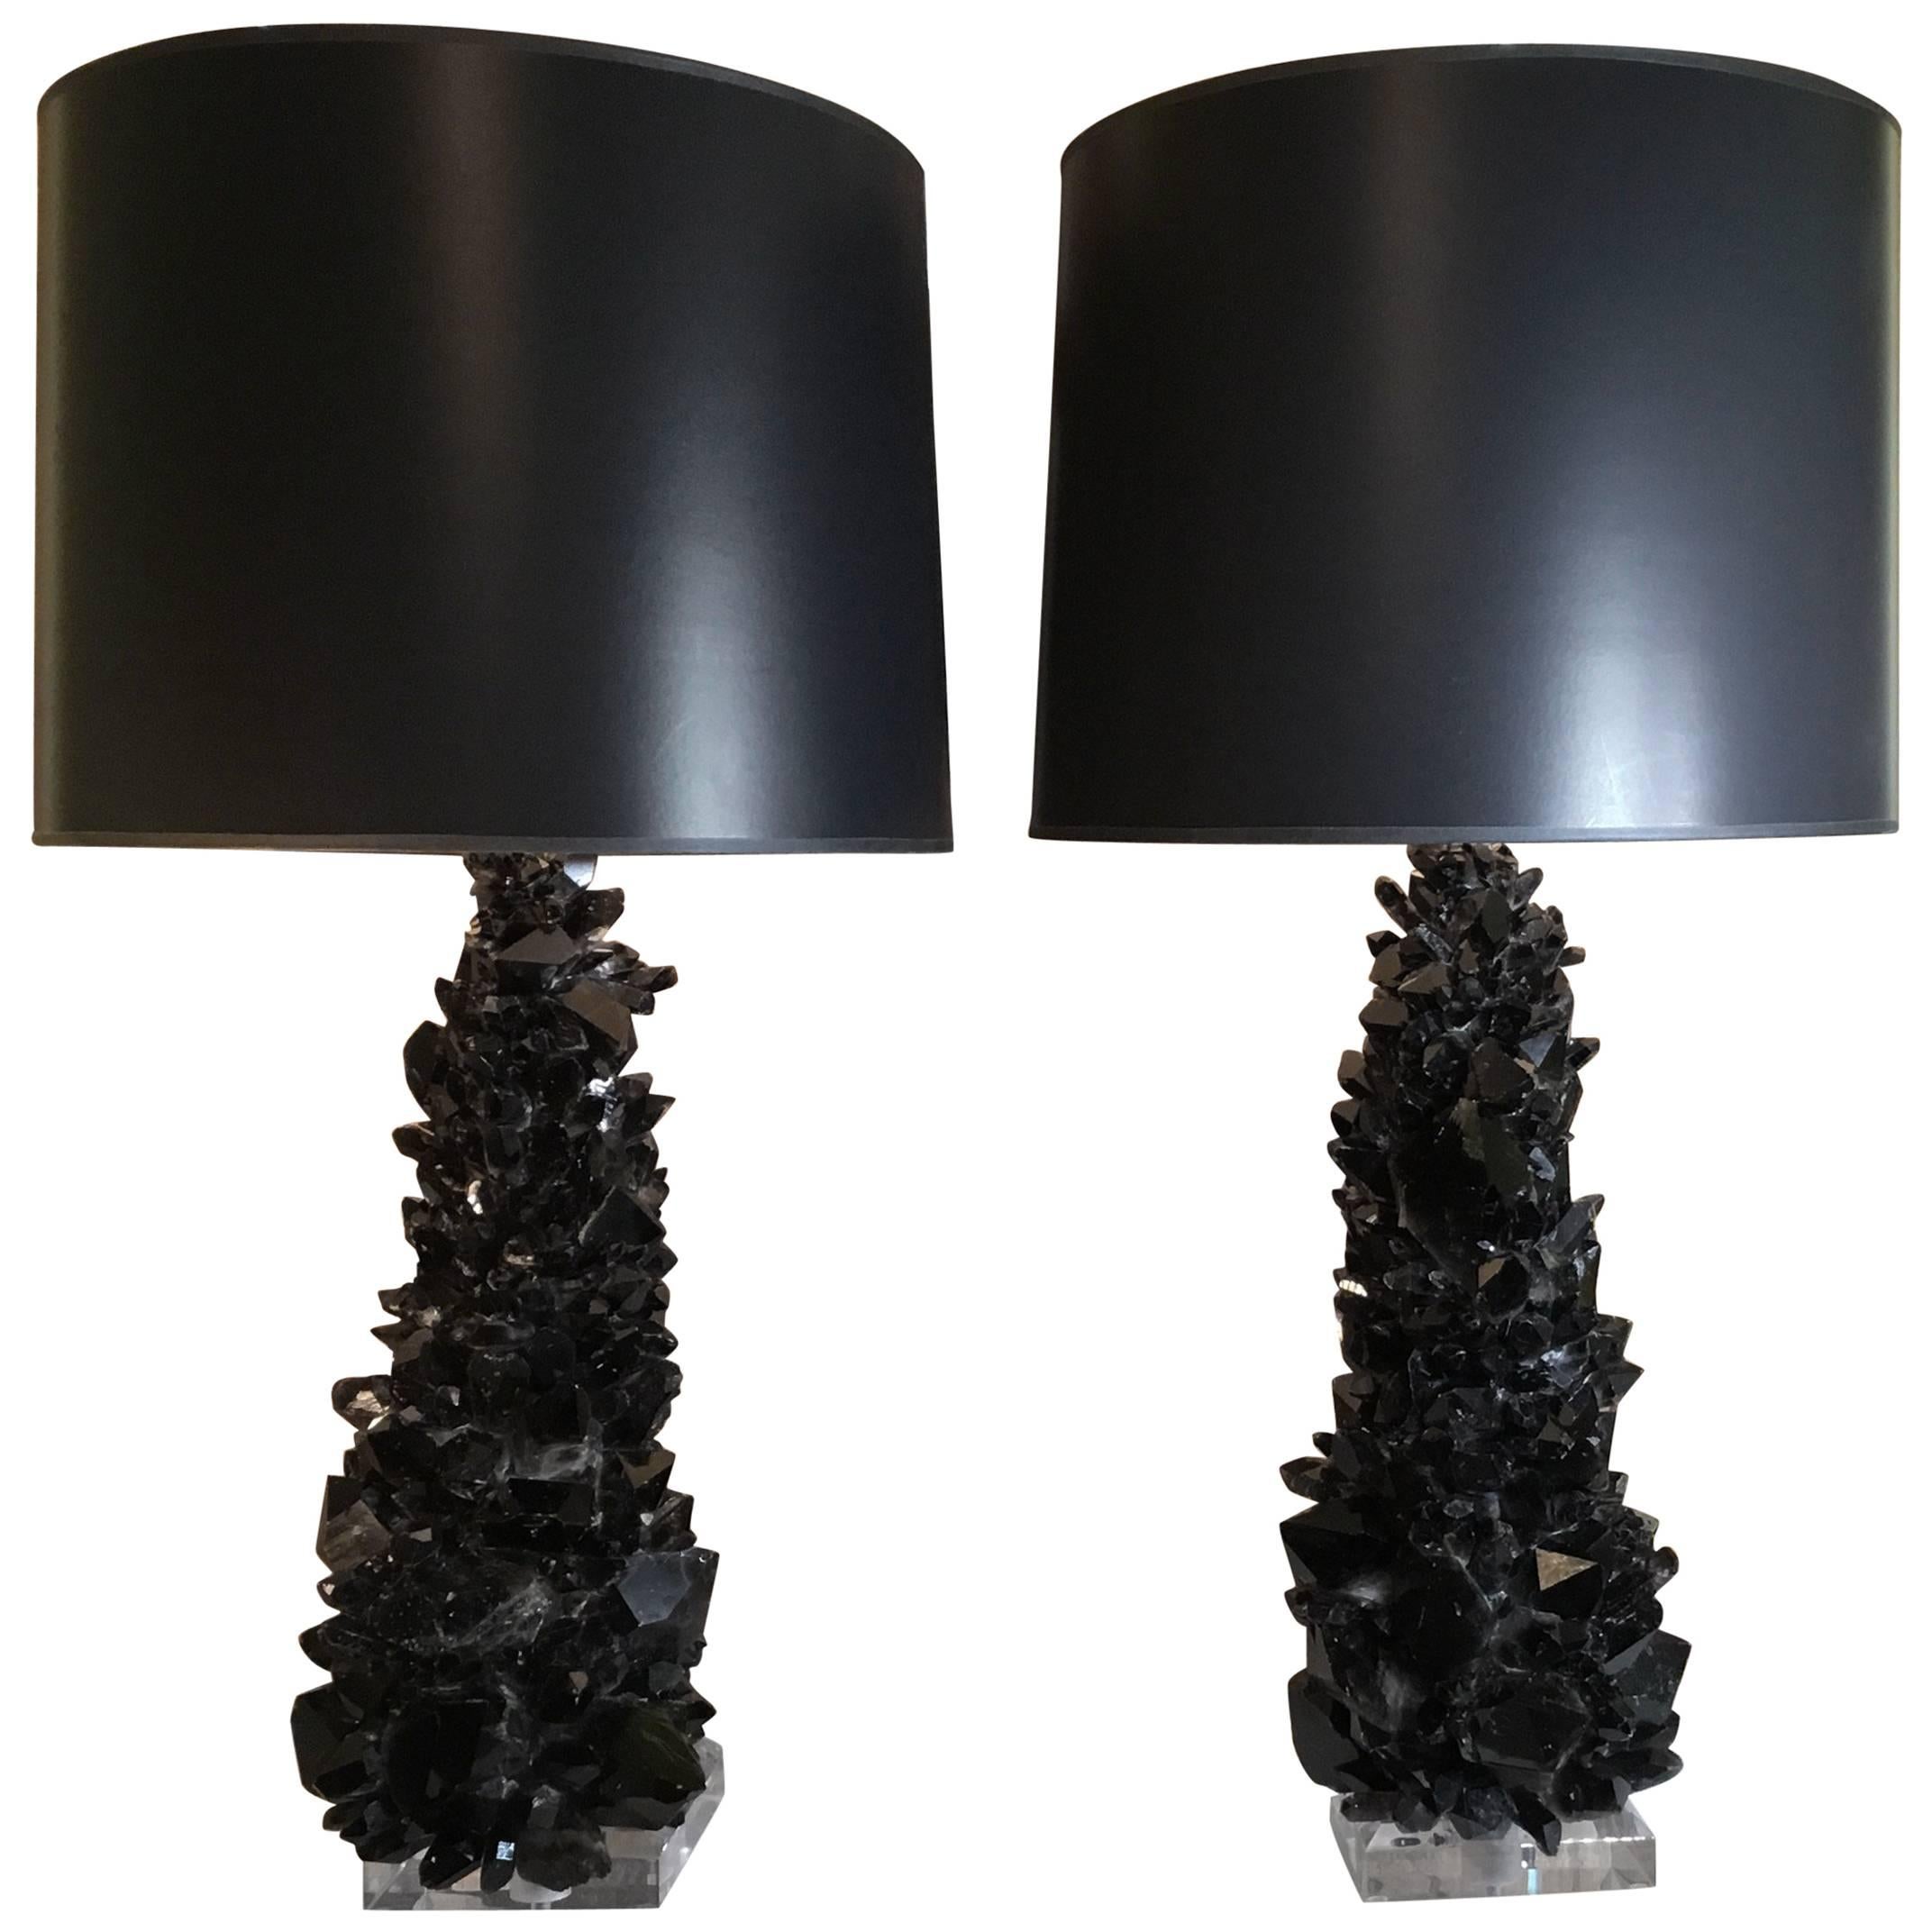 Pair of Spectacular Large Black Quartz Crystal Table Lamps